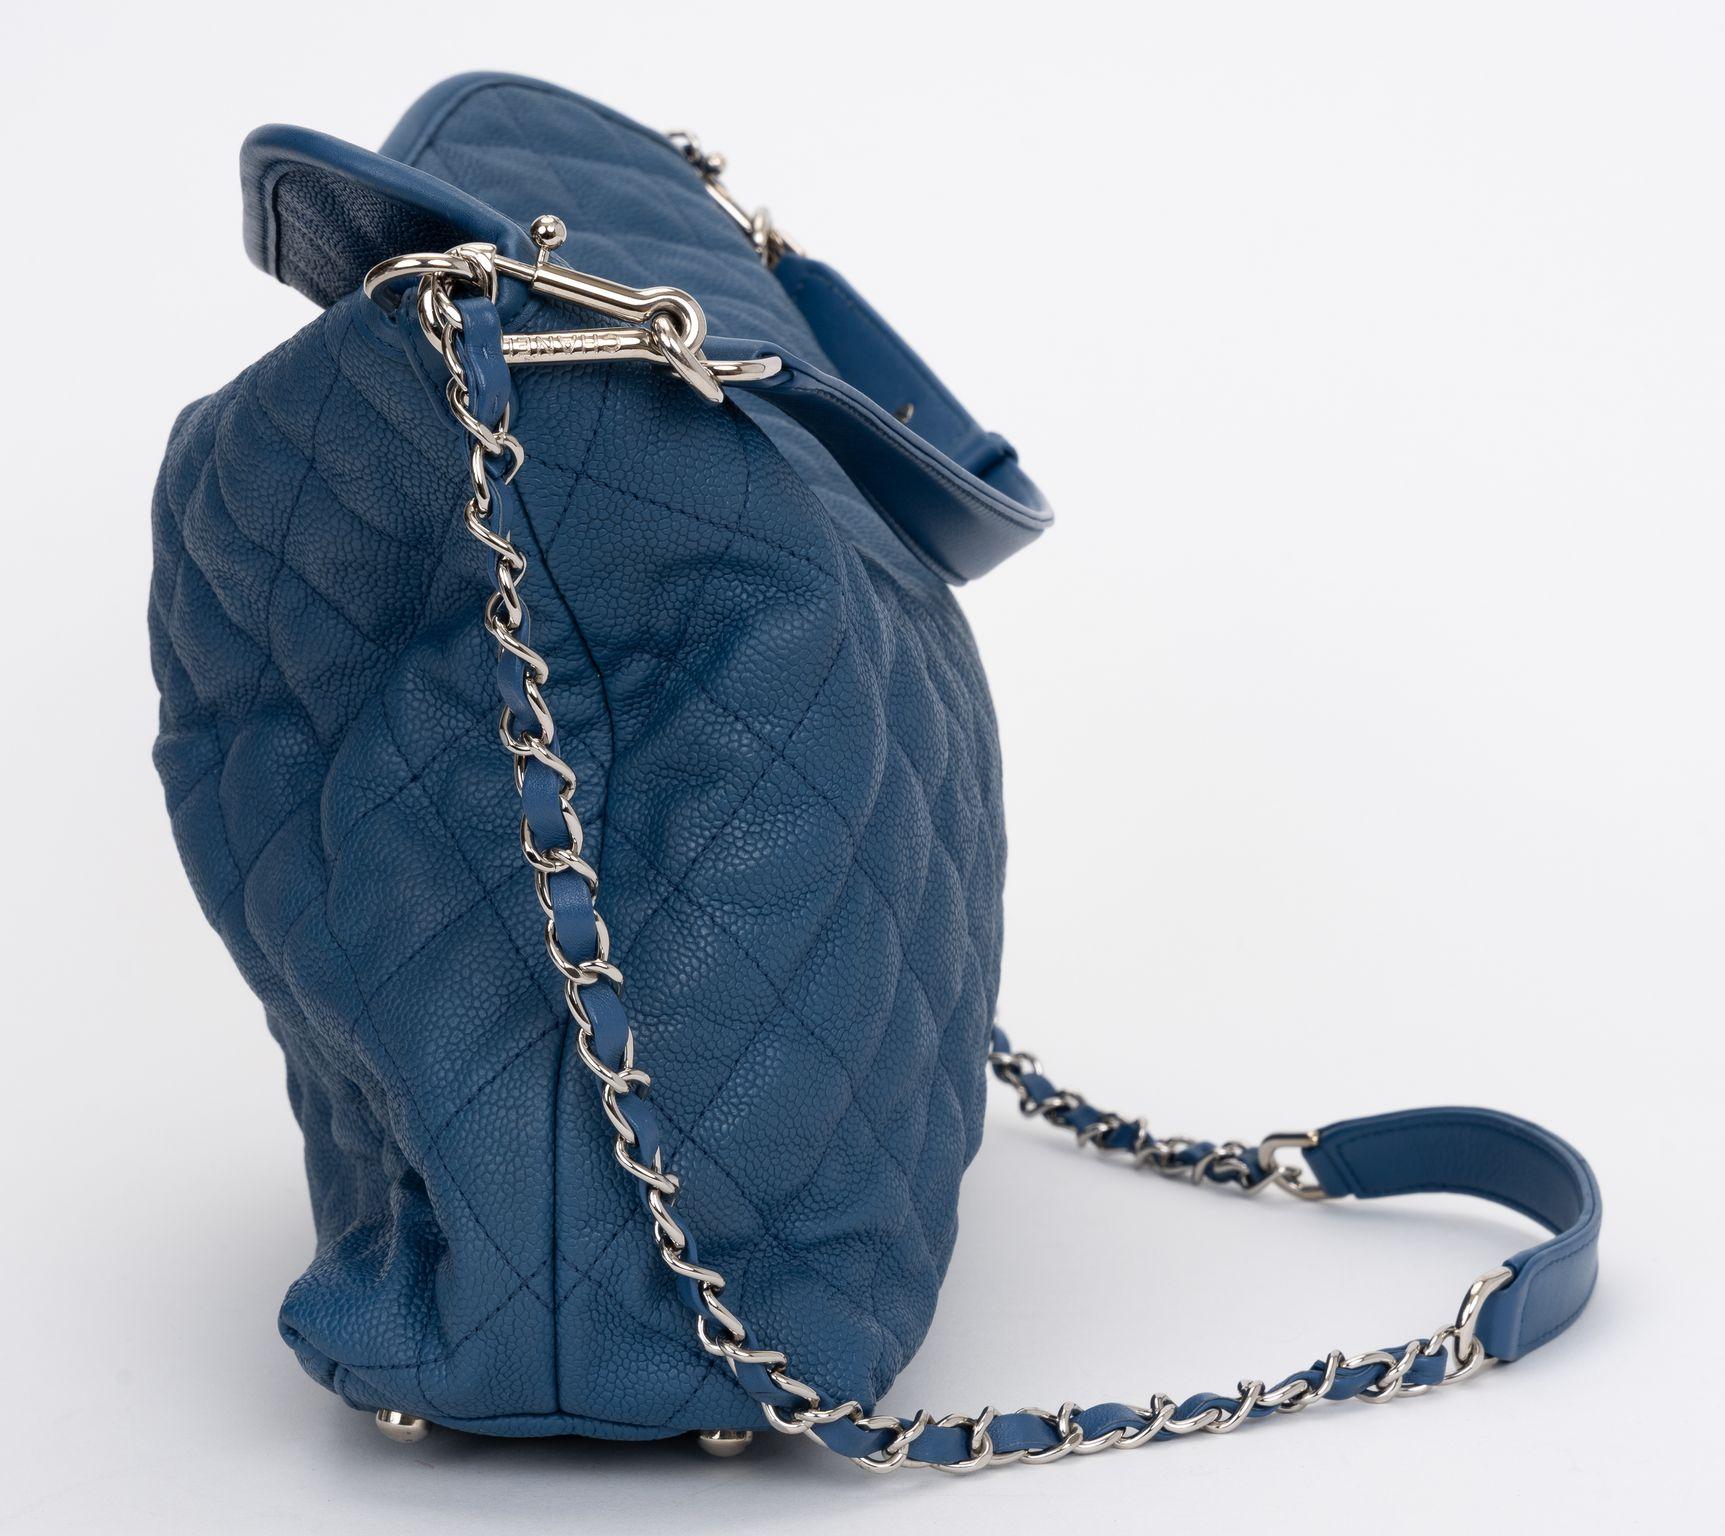 Chanel Denim Blue French Riviera Hobo In Excellent Condition For Sale In West Hollywood, CA